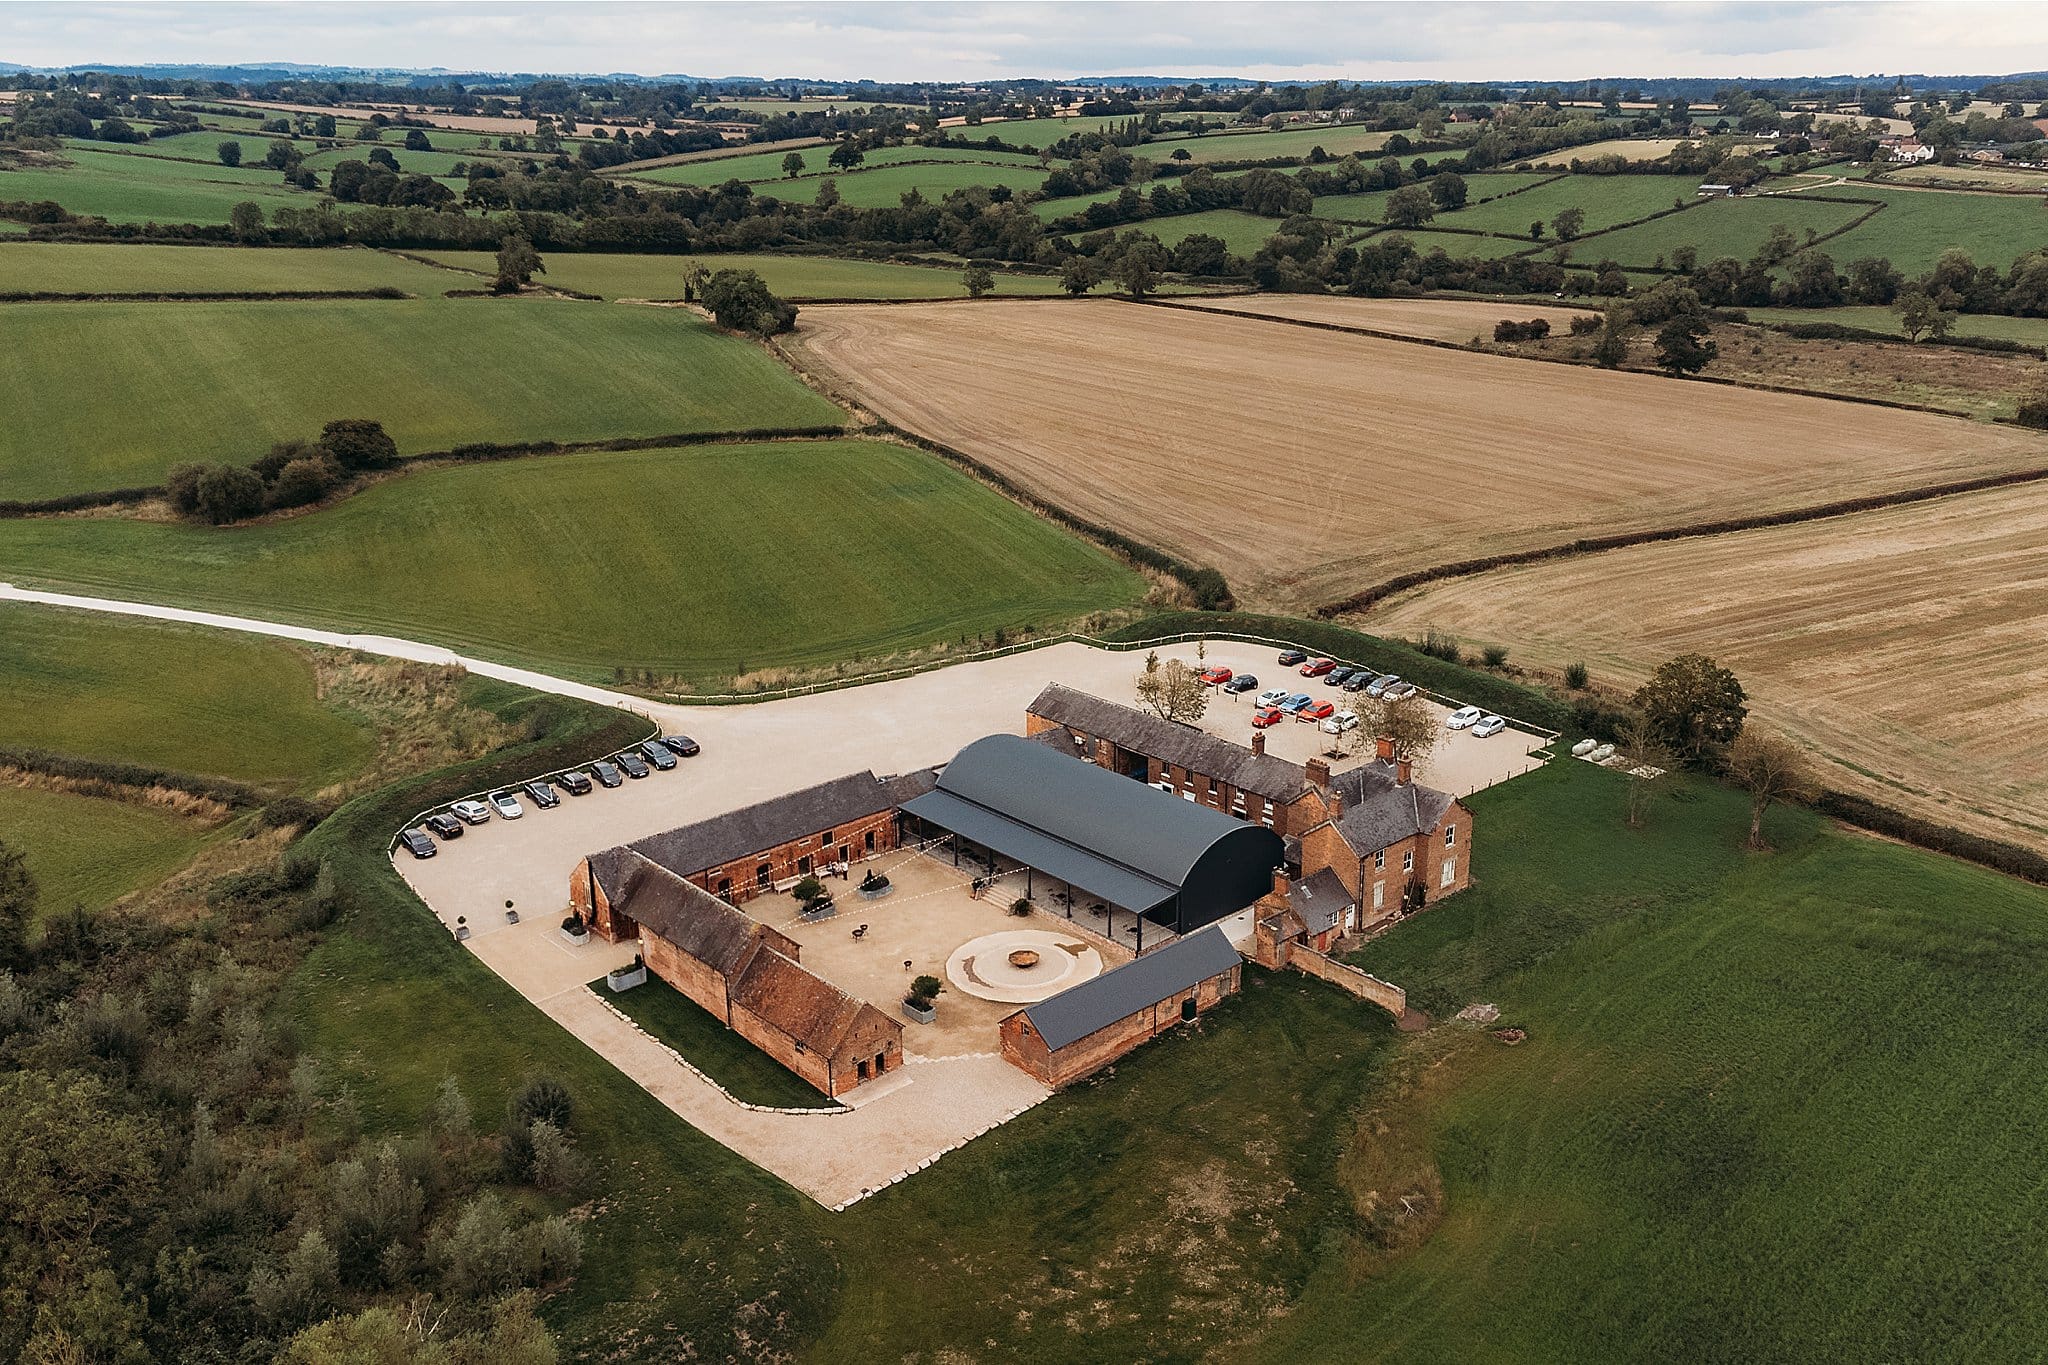 Aerial view of Grangefields wedding venue in Derbyshire from above using a drone